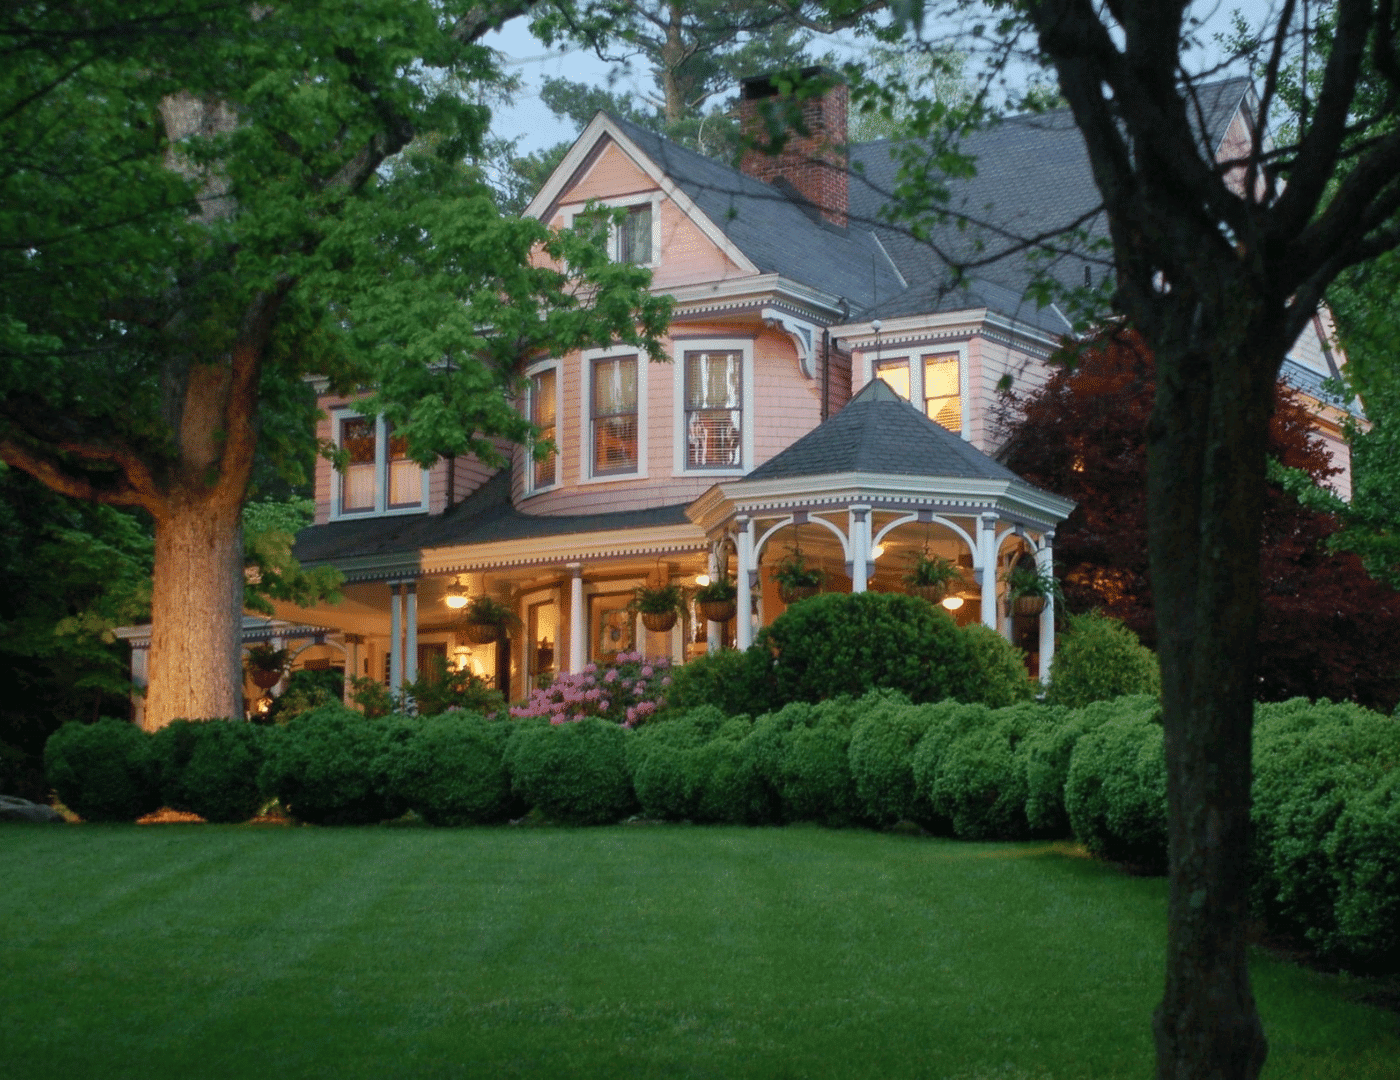 ext of pink 2 story victorian B&B with lush green hedges and a gazebo porch